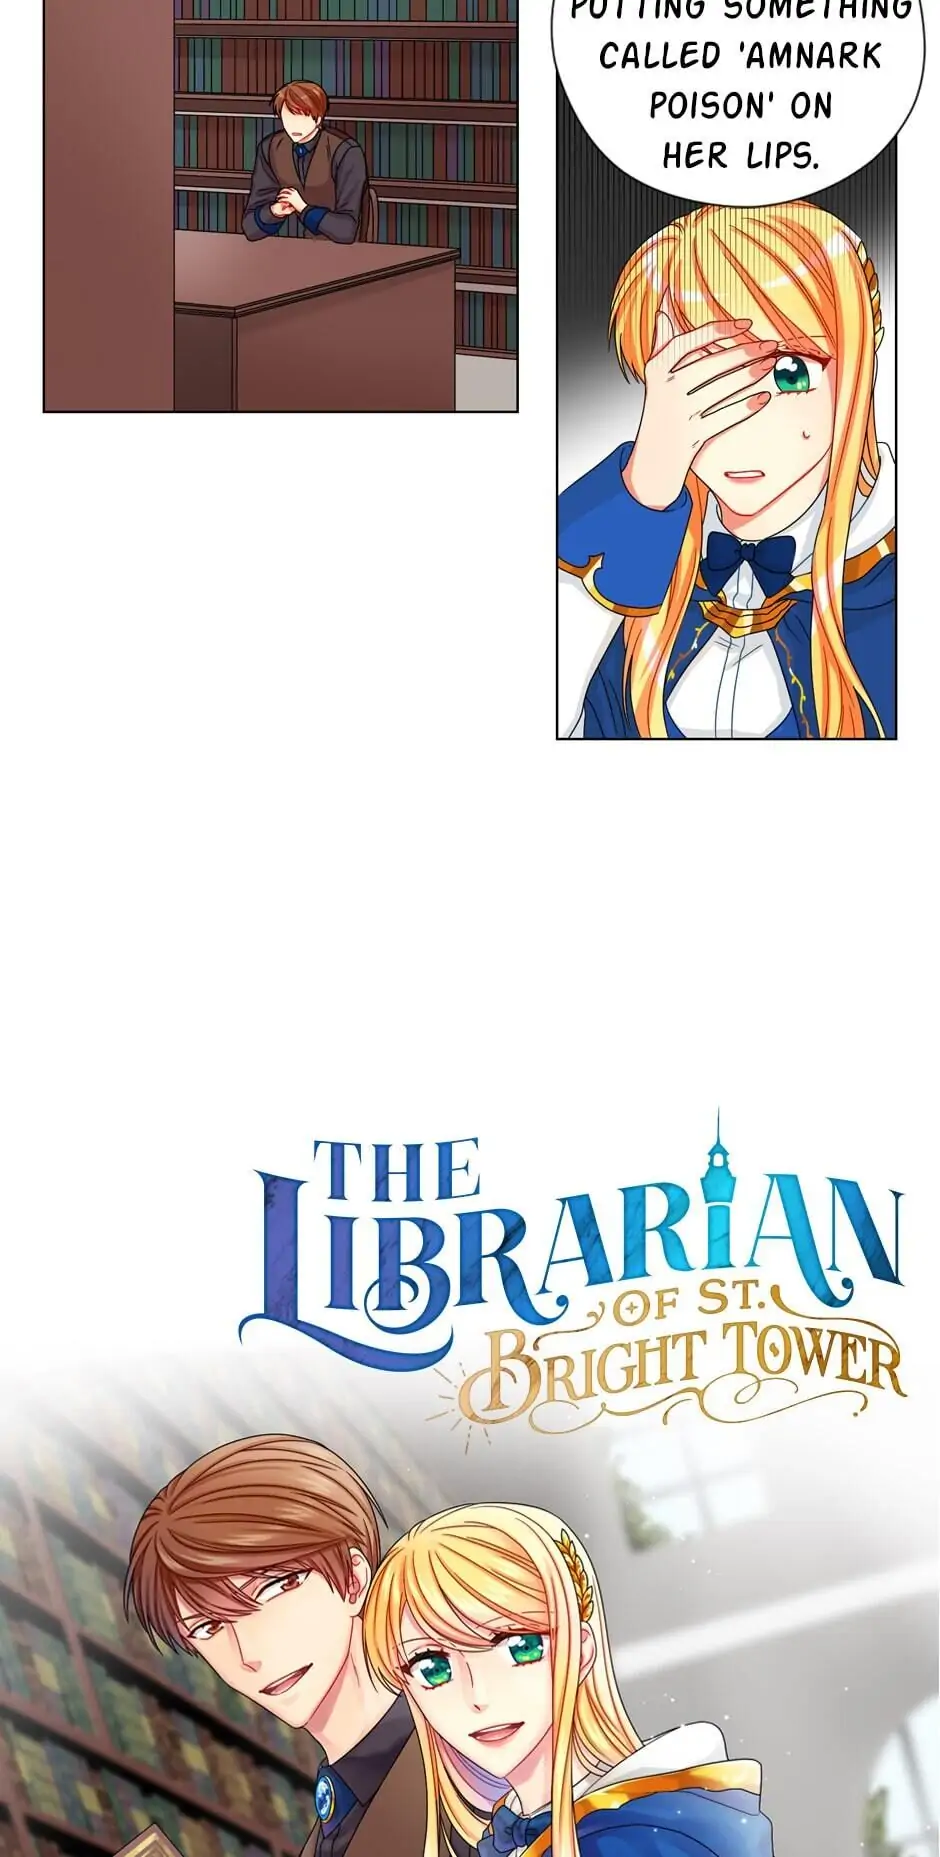 The Magic Tower Librarian chapter 9